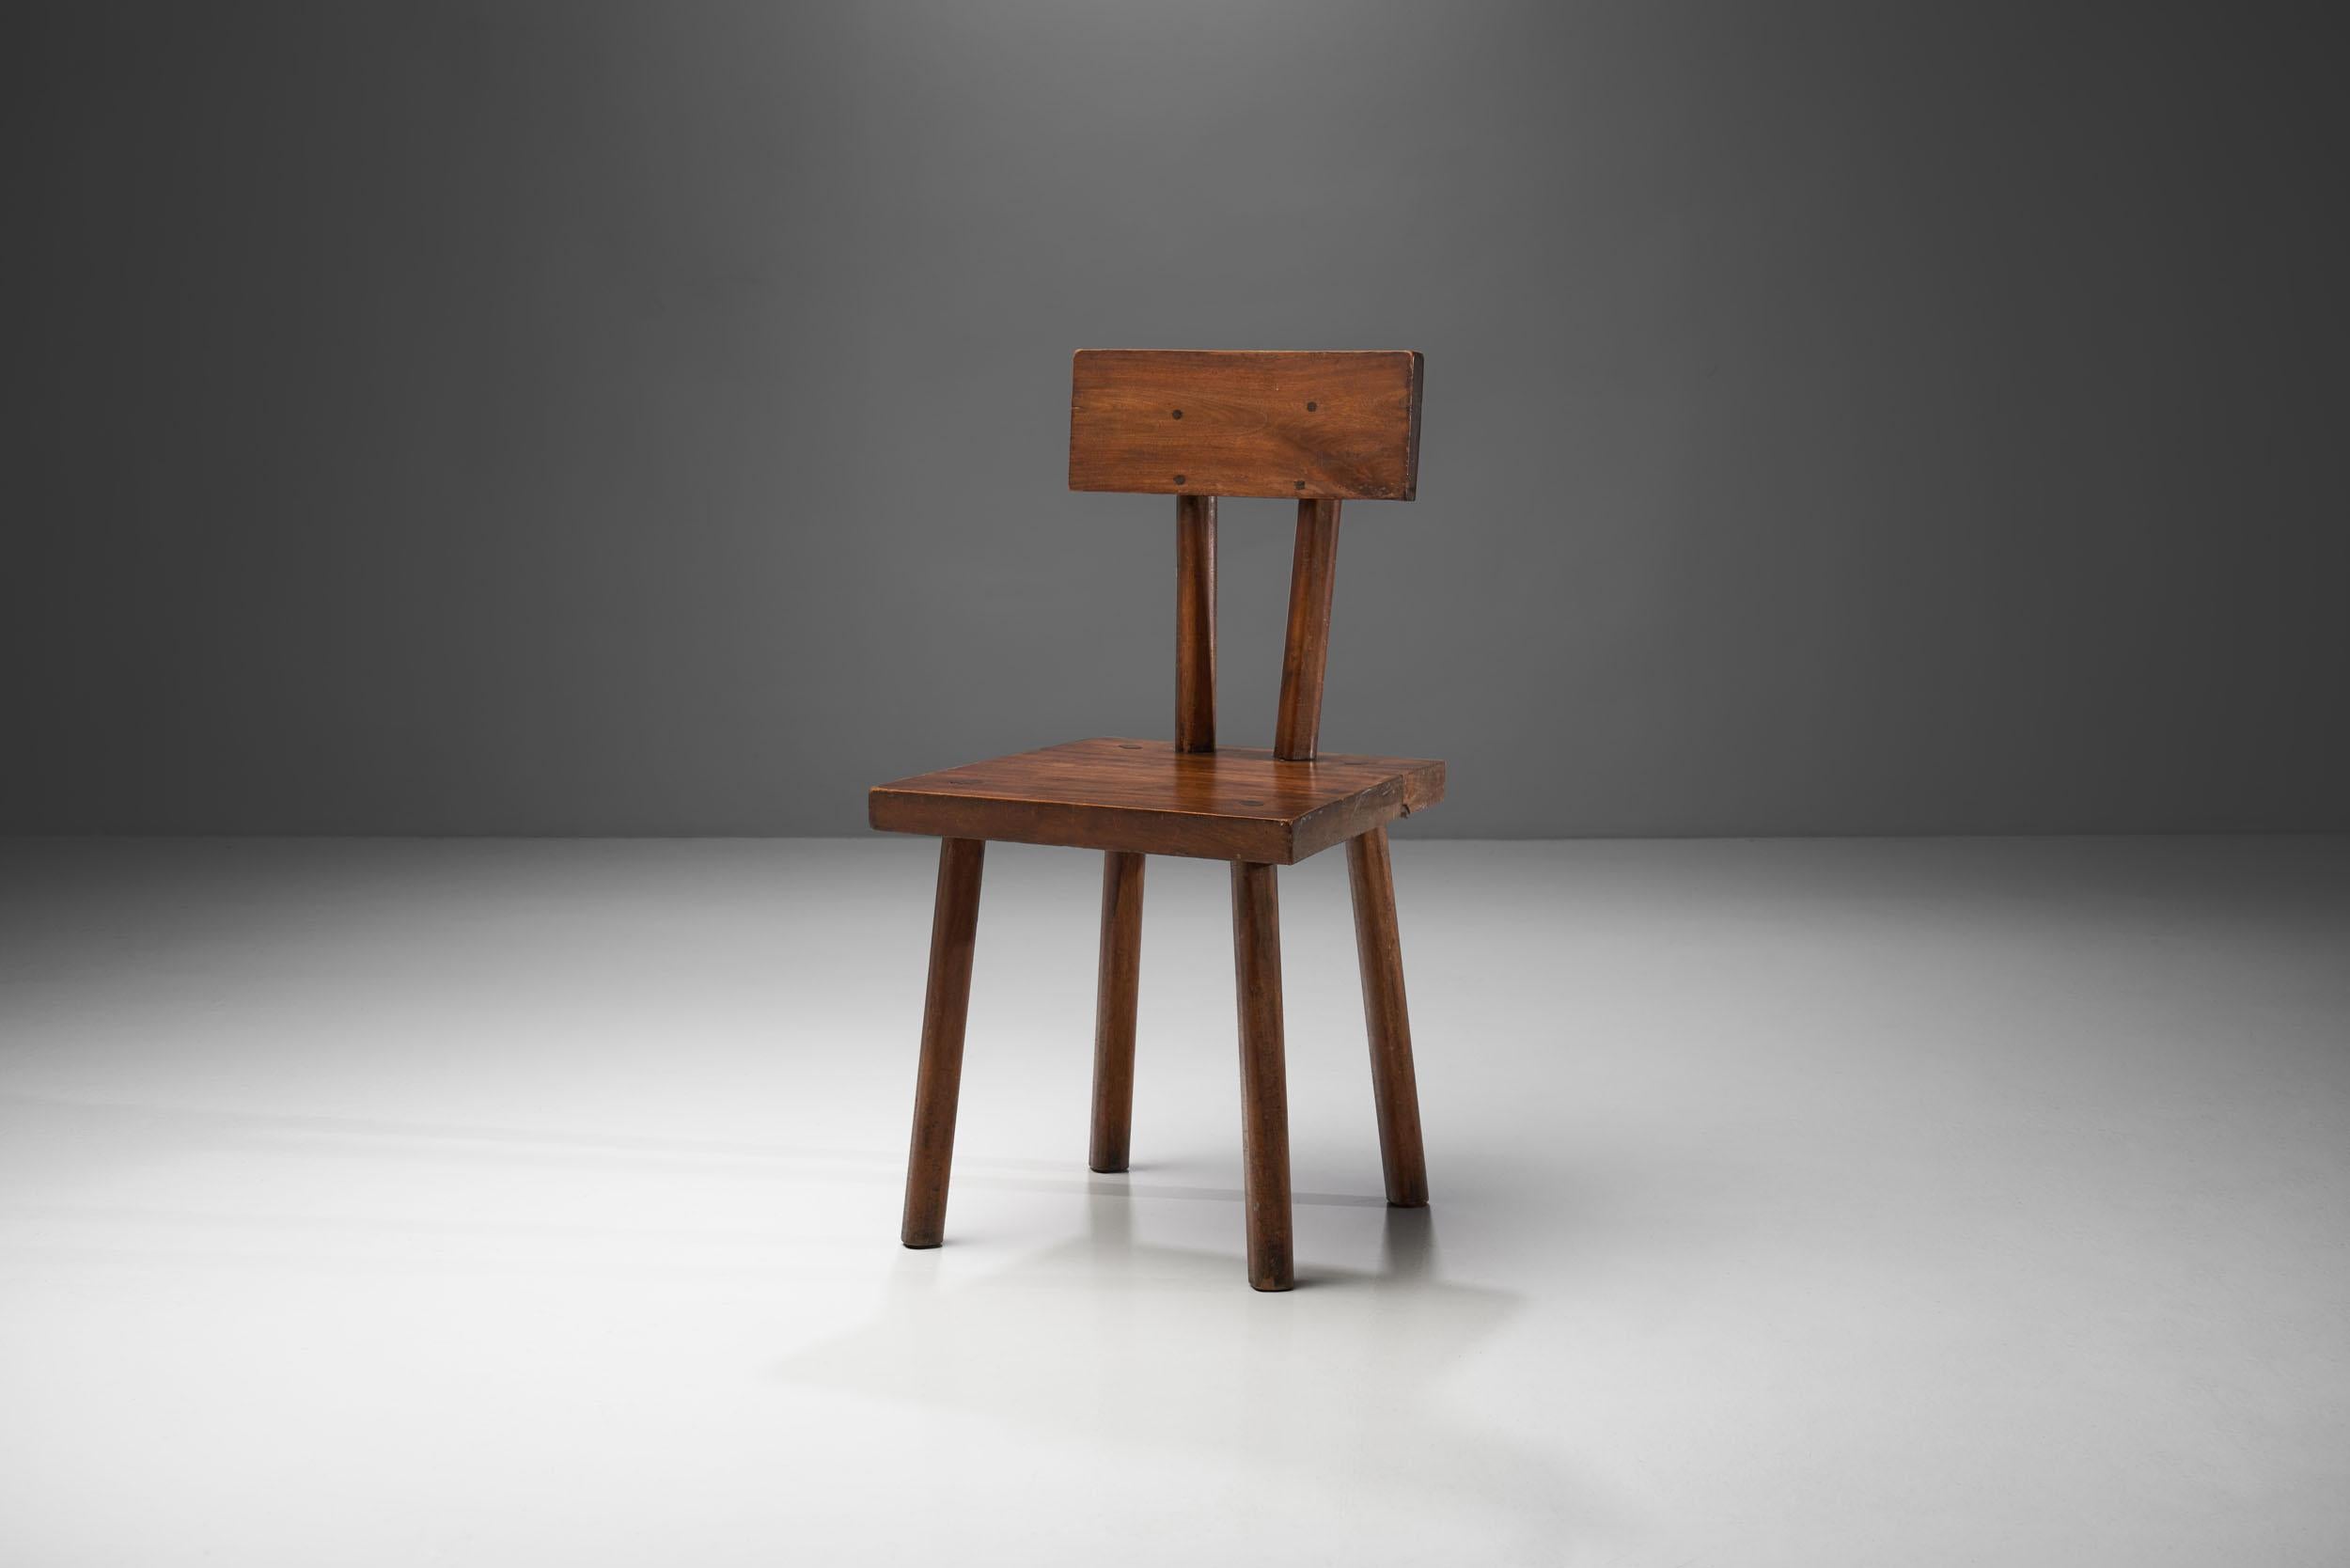 Brutalist handmade chair made of solid wood from circa 1950s. With a robust organic form and an earth-toned palette, this chair is the embodiment of Brutalism. The chair has a startling rawness, but with its warm-toned and slightly asymmetrical body